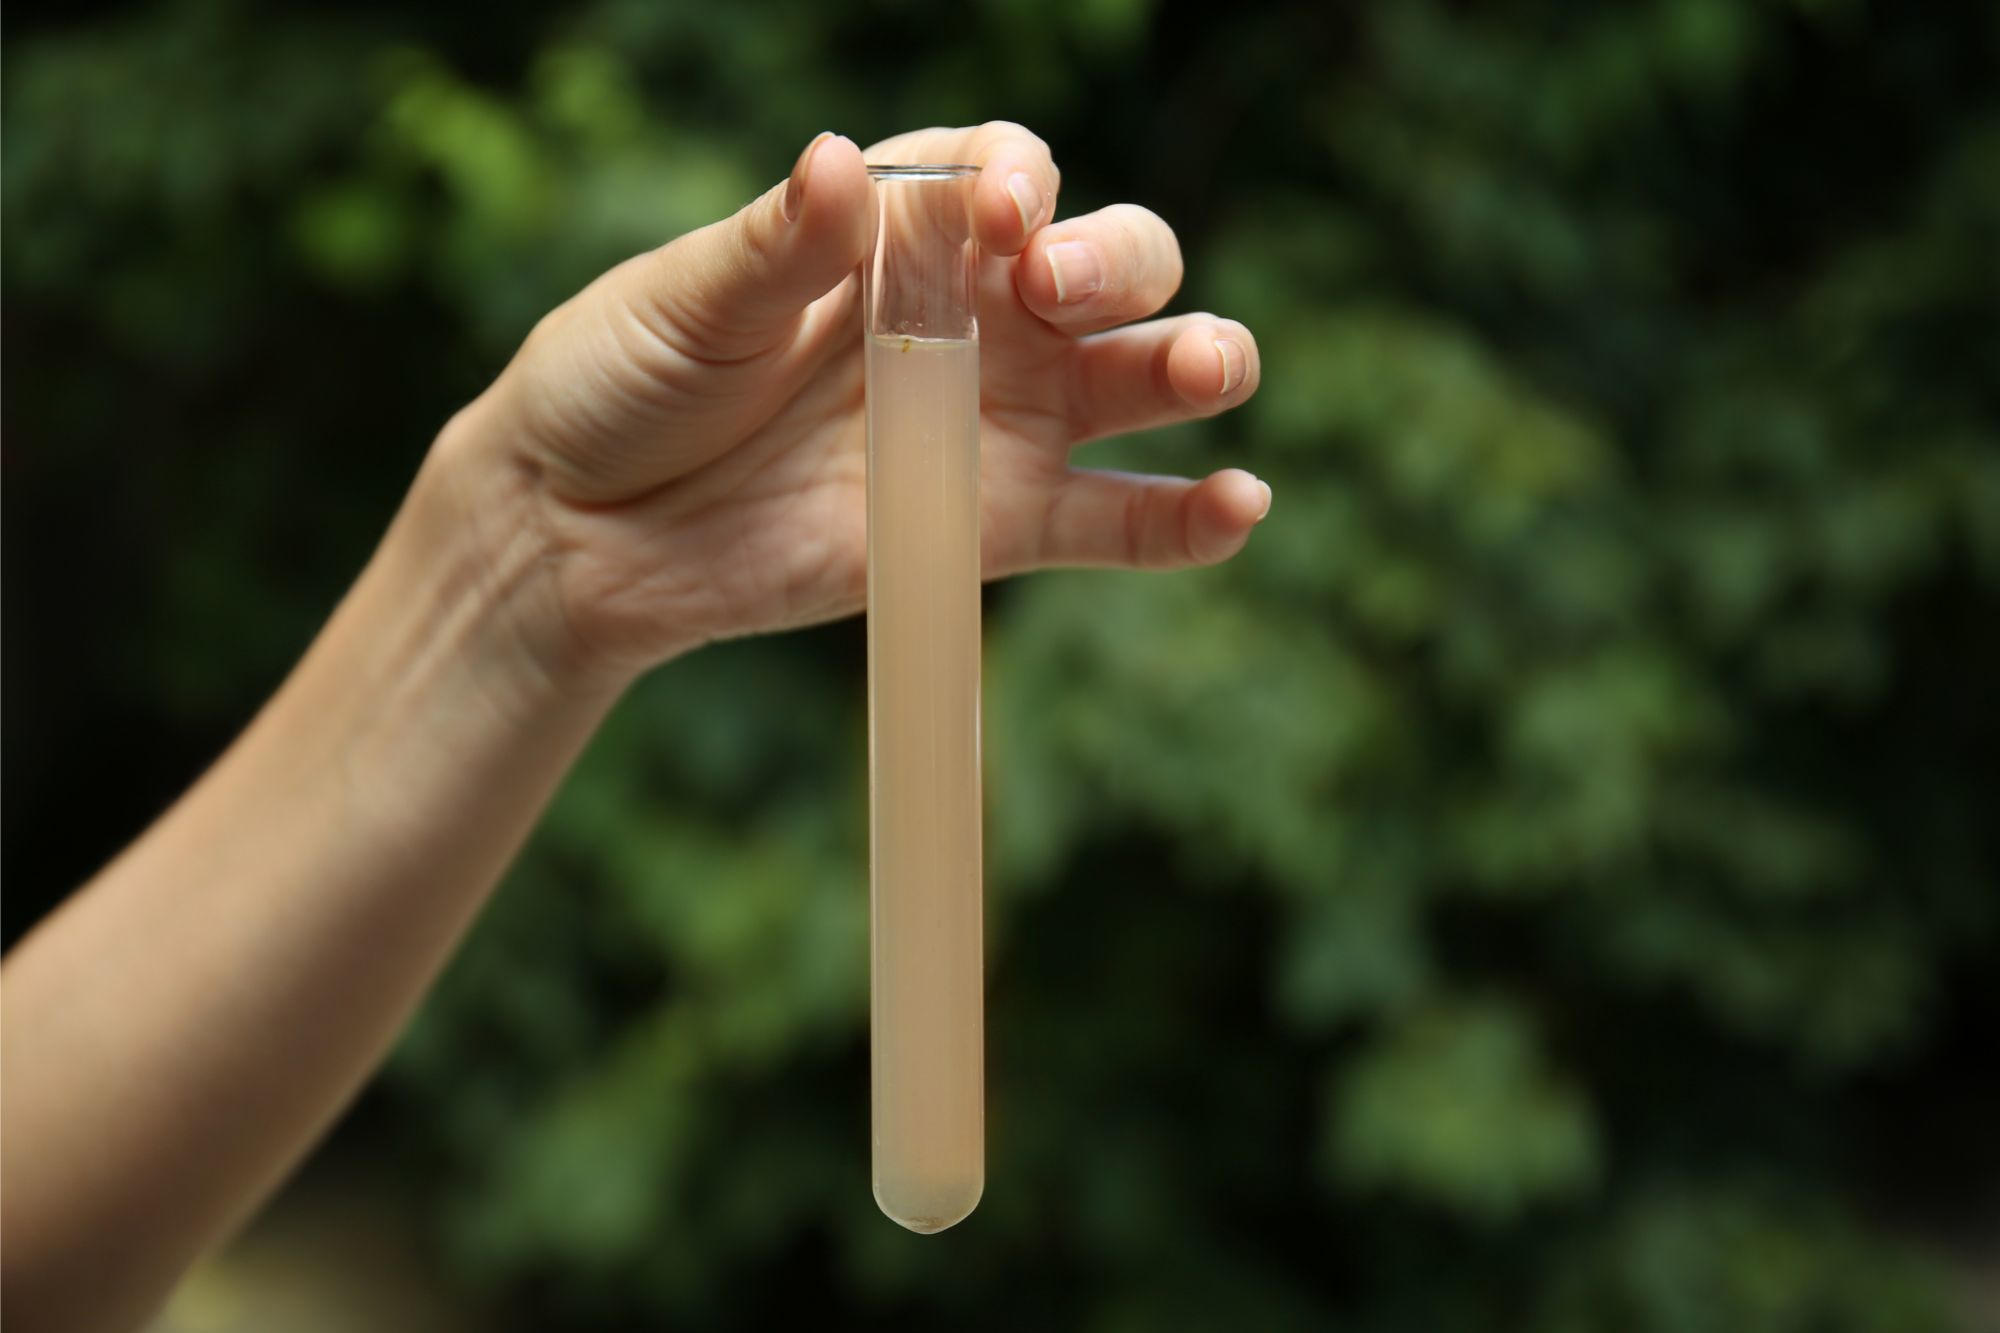 Vial of contaminated water